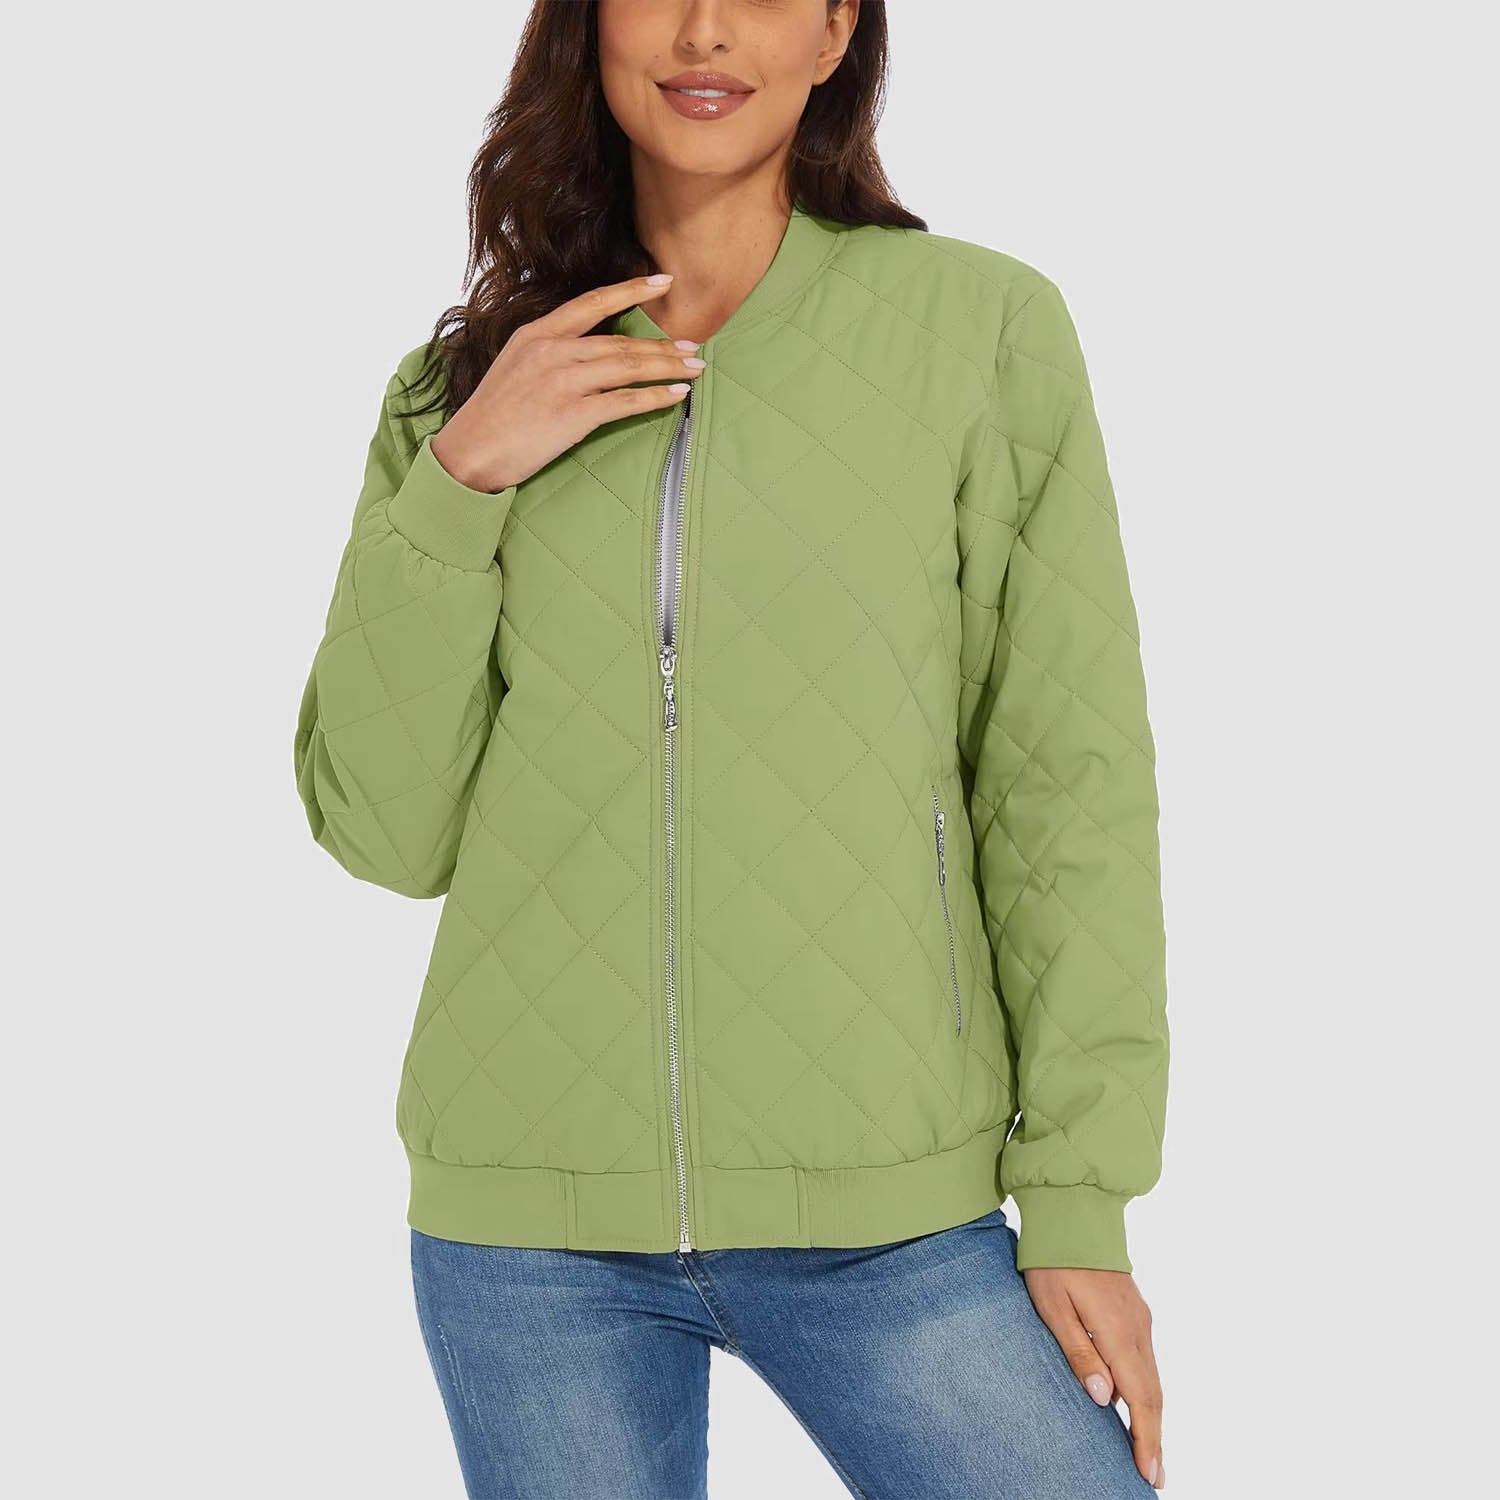 Women's Quilted Jackets Bomber Jacket with 2 Zip Pockets Puffer 